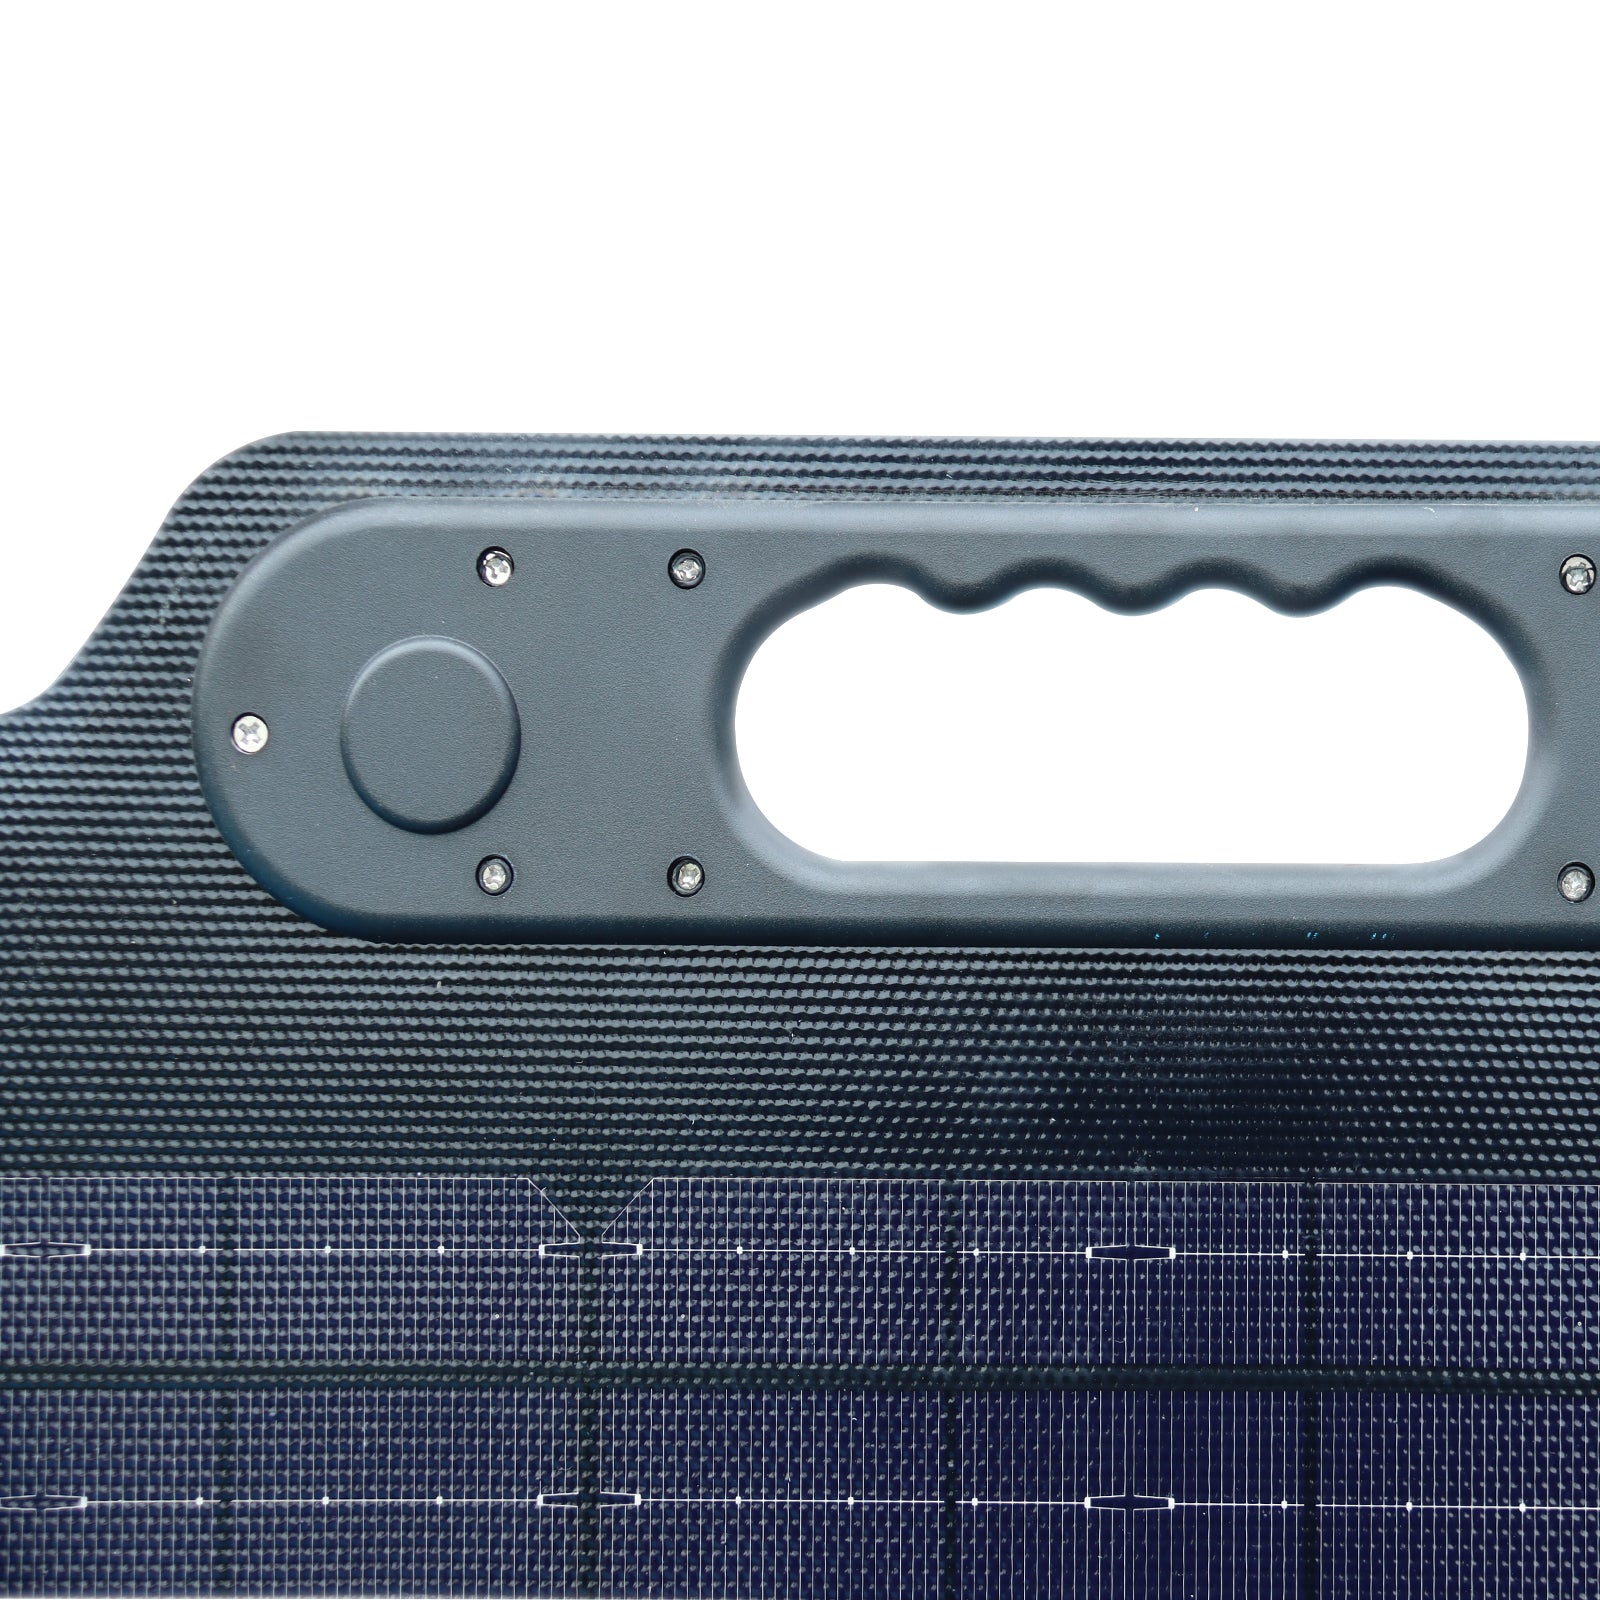 Solarparts@ Mono integrated foldable solar charger 19.8V/200W 665*614*40mm